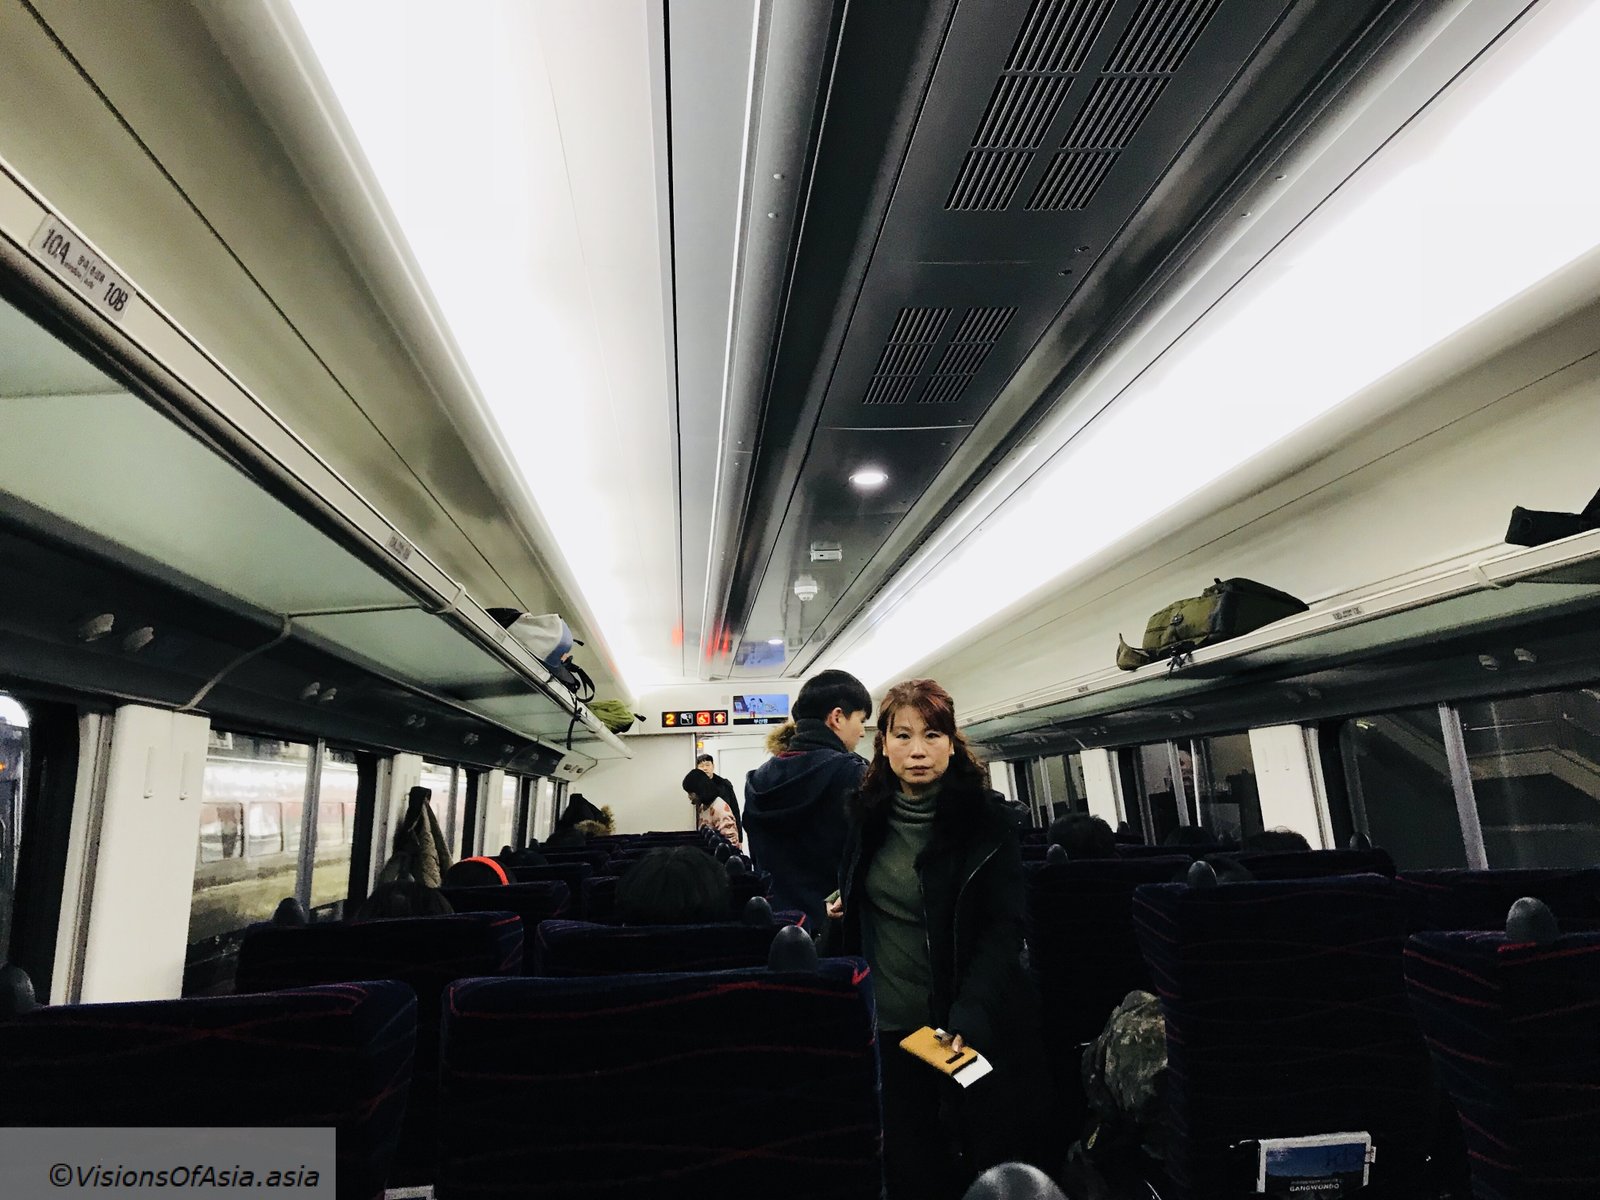 Inside the train to Busan